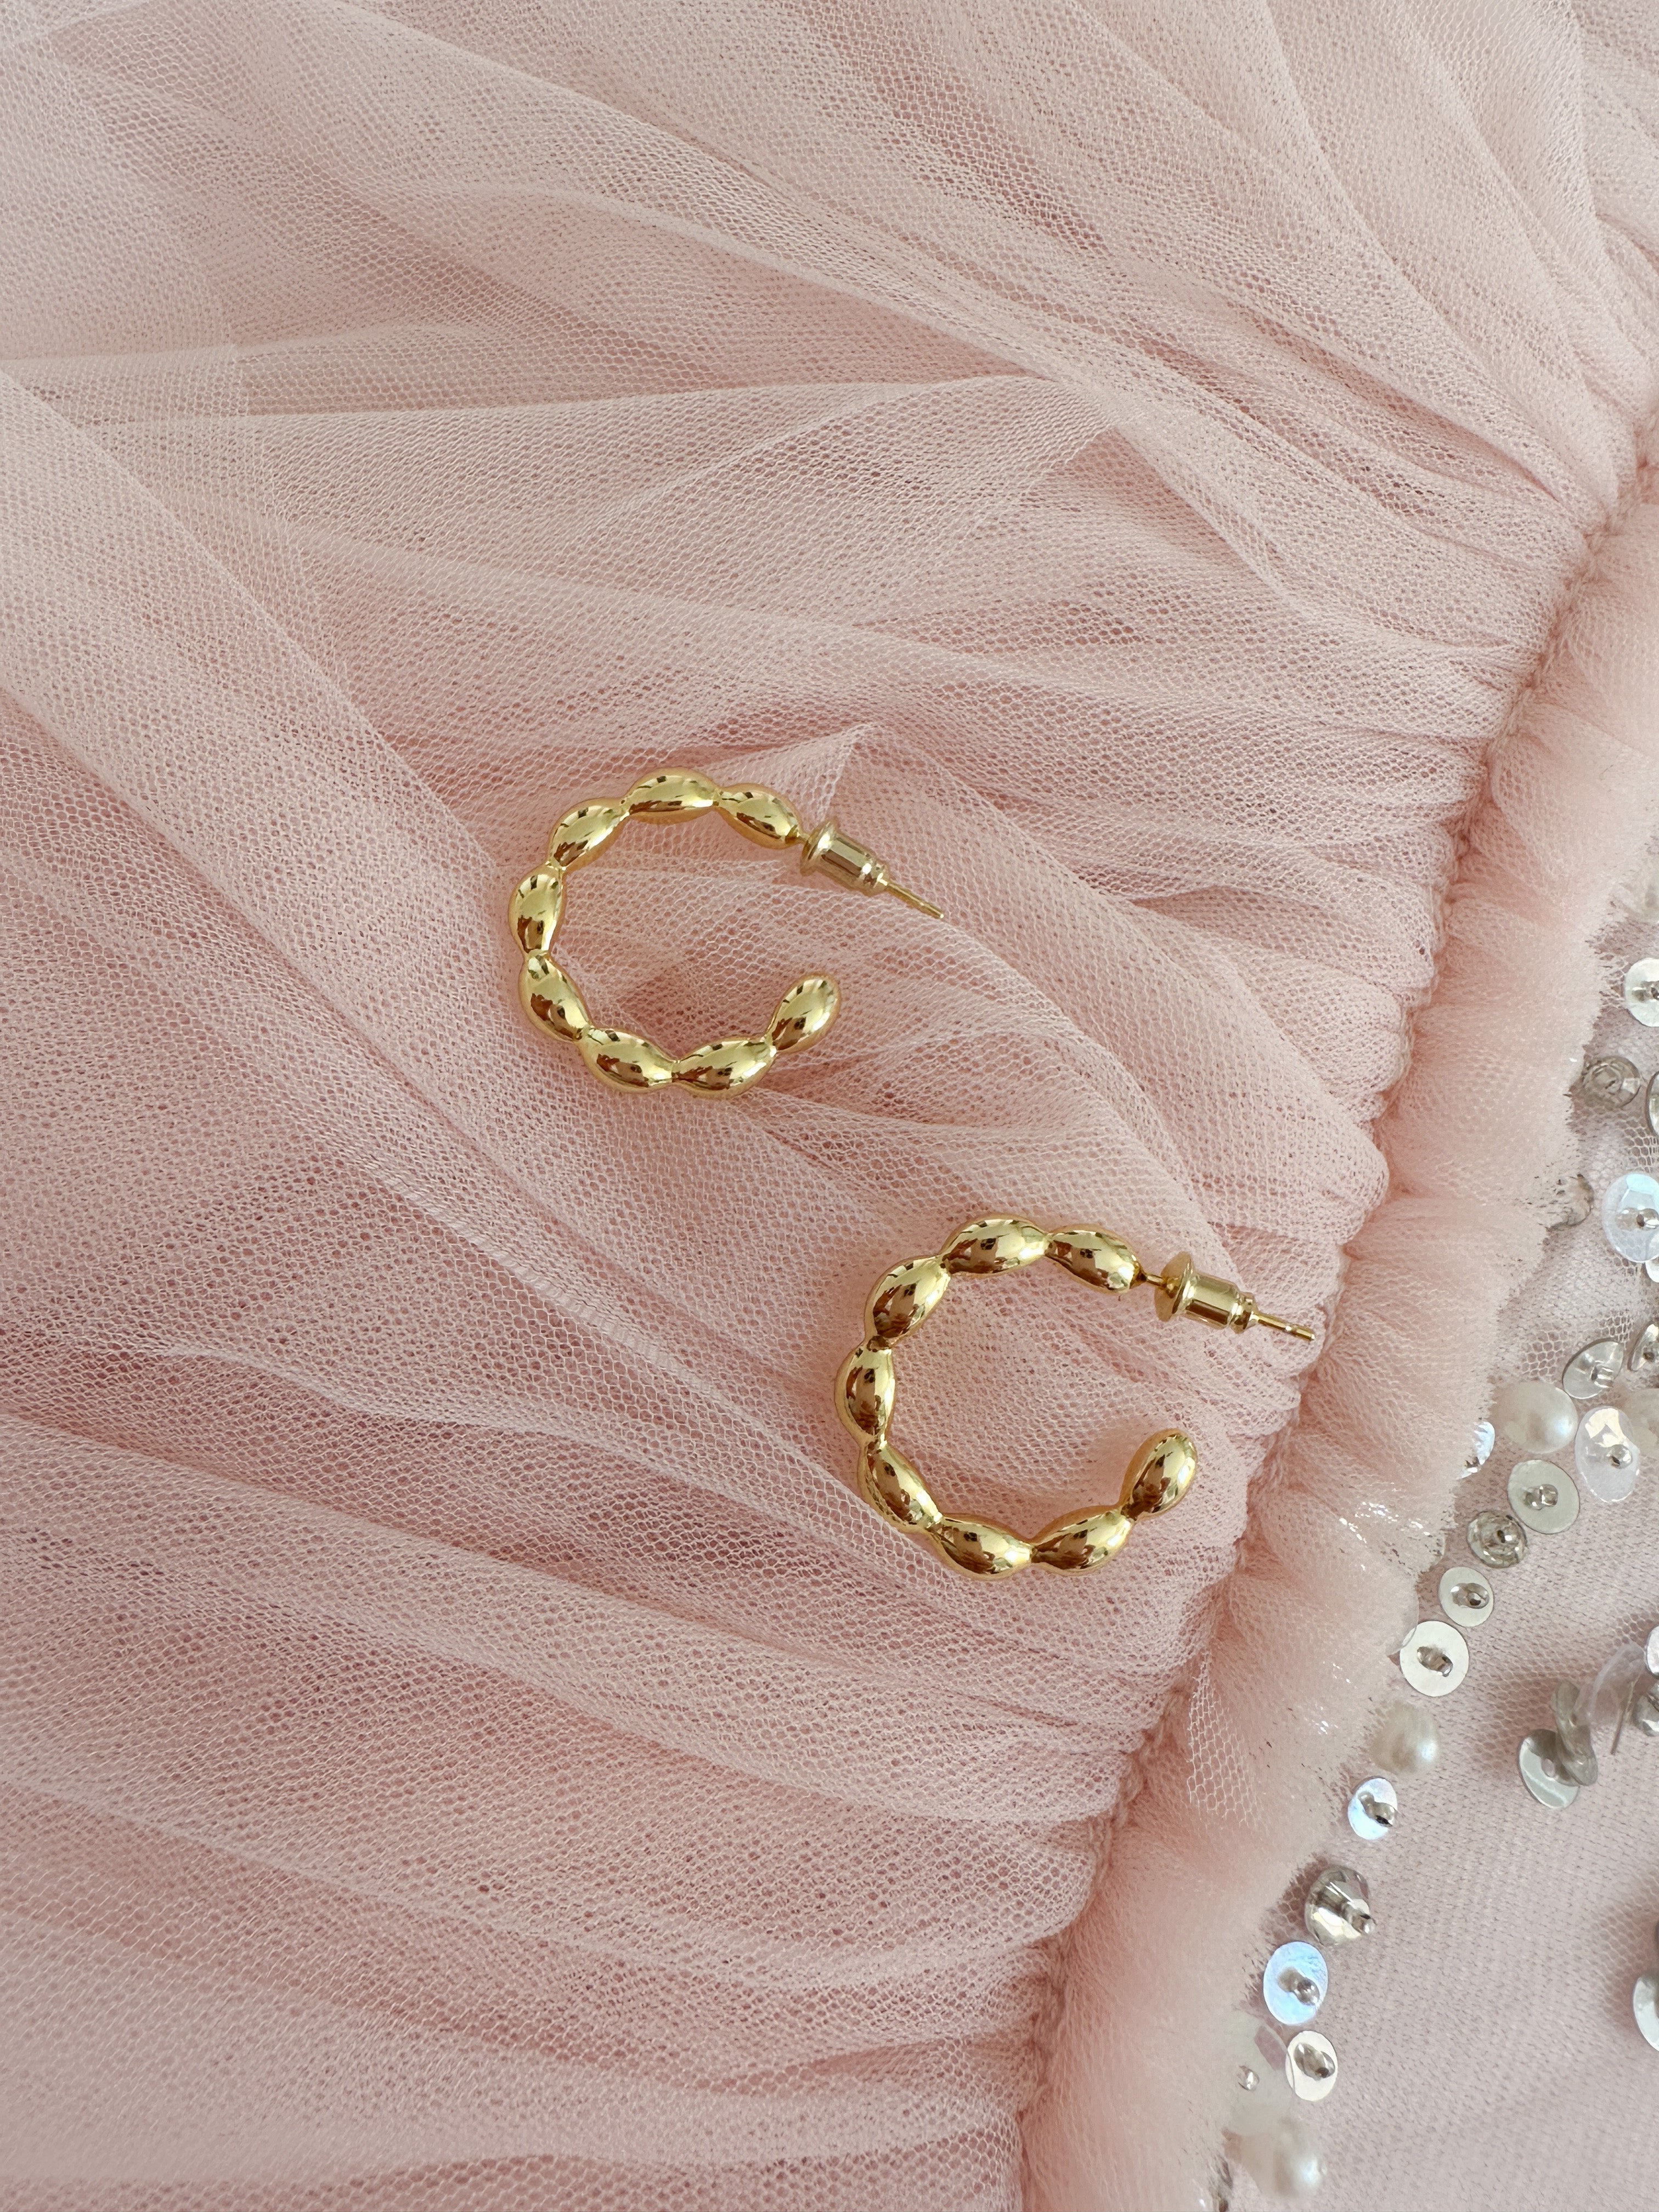 The “Gold Ruffle” Hoops